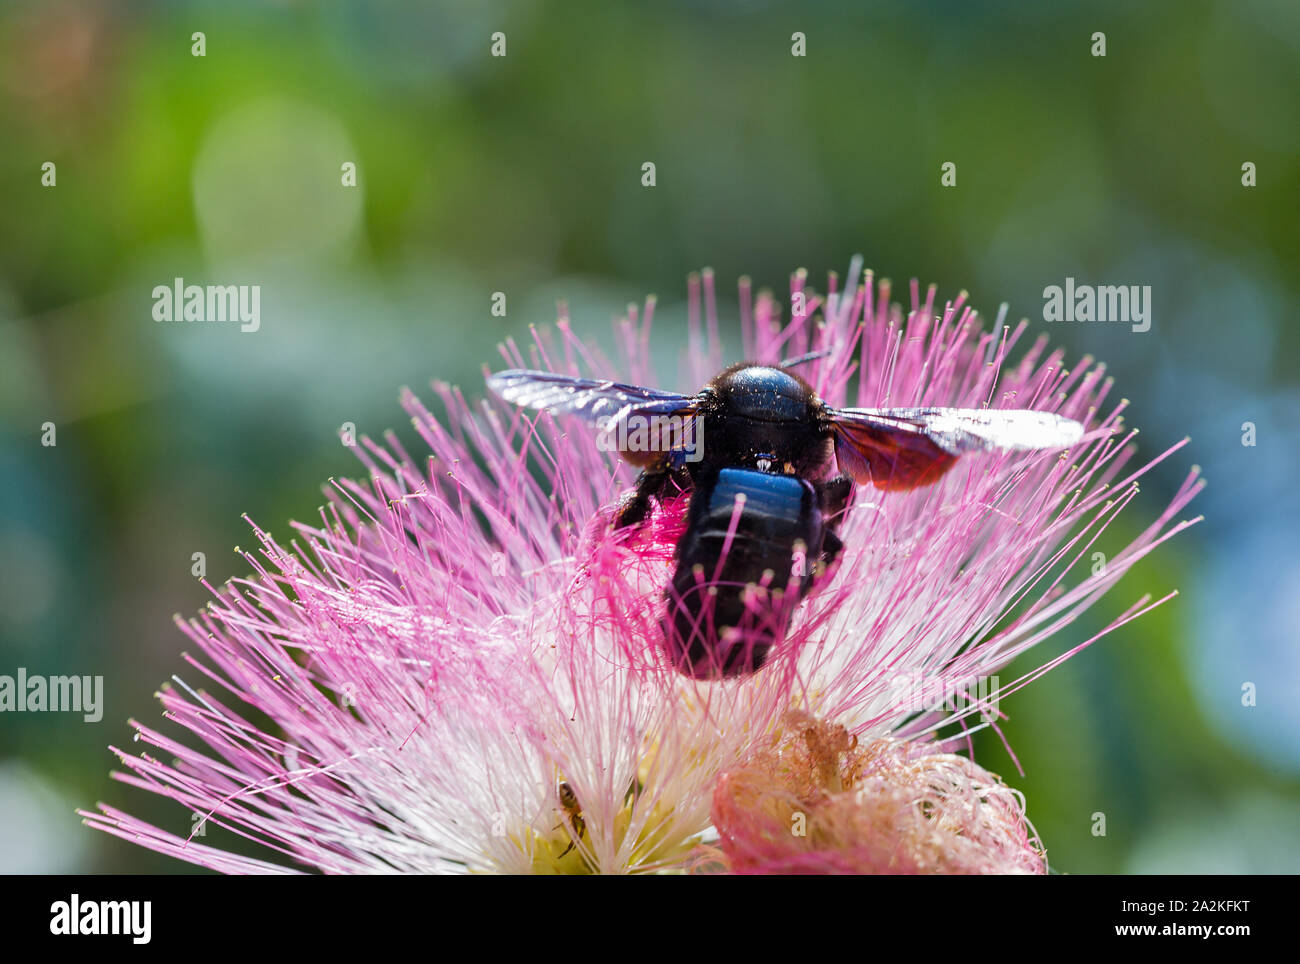 Blossoming Albizia julibrissin pink flower with big black bumblebee on Corsica island, France. Albizia julibrissin is known as Lenkoran acacia tree as Stock Photo